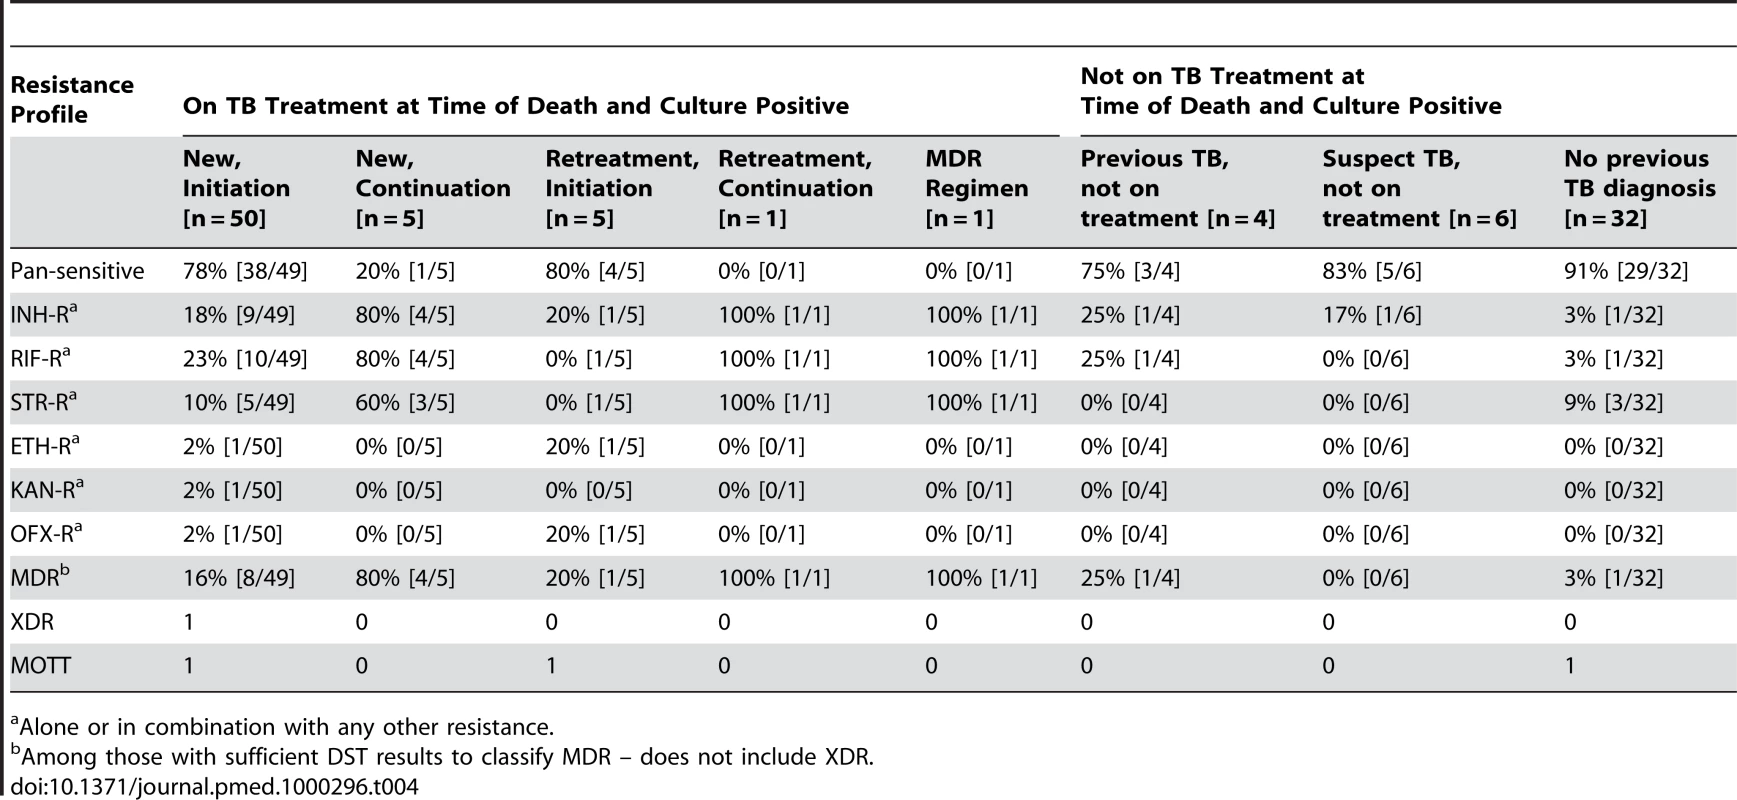 Resistance profiles for those with positive cultures, categorized by TB treatment status.